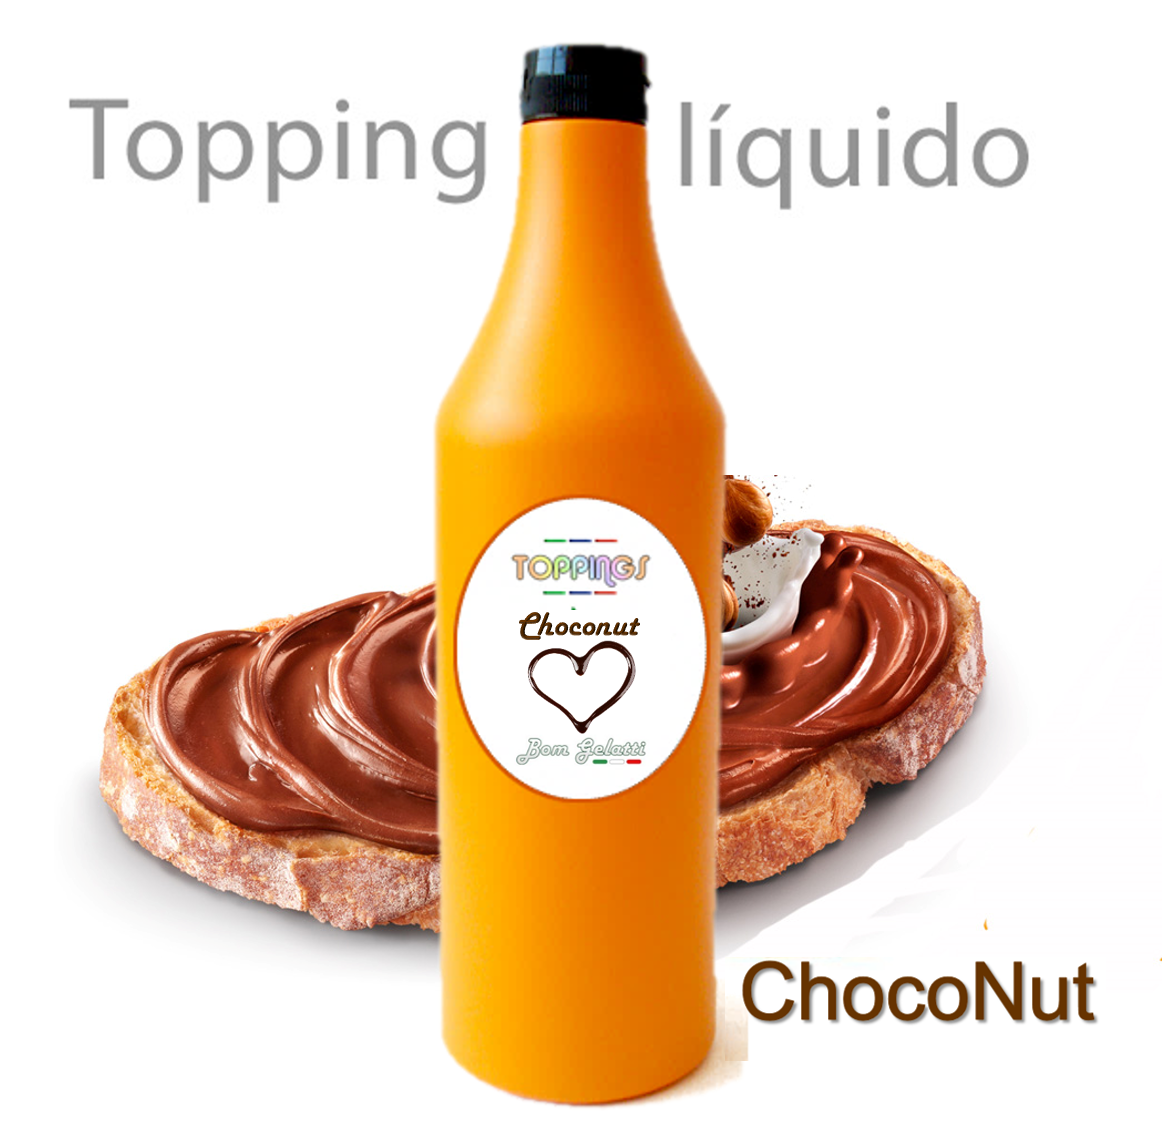 Topping Choco Nut